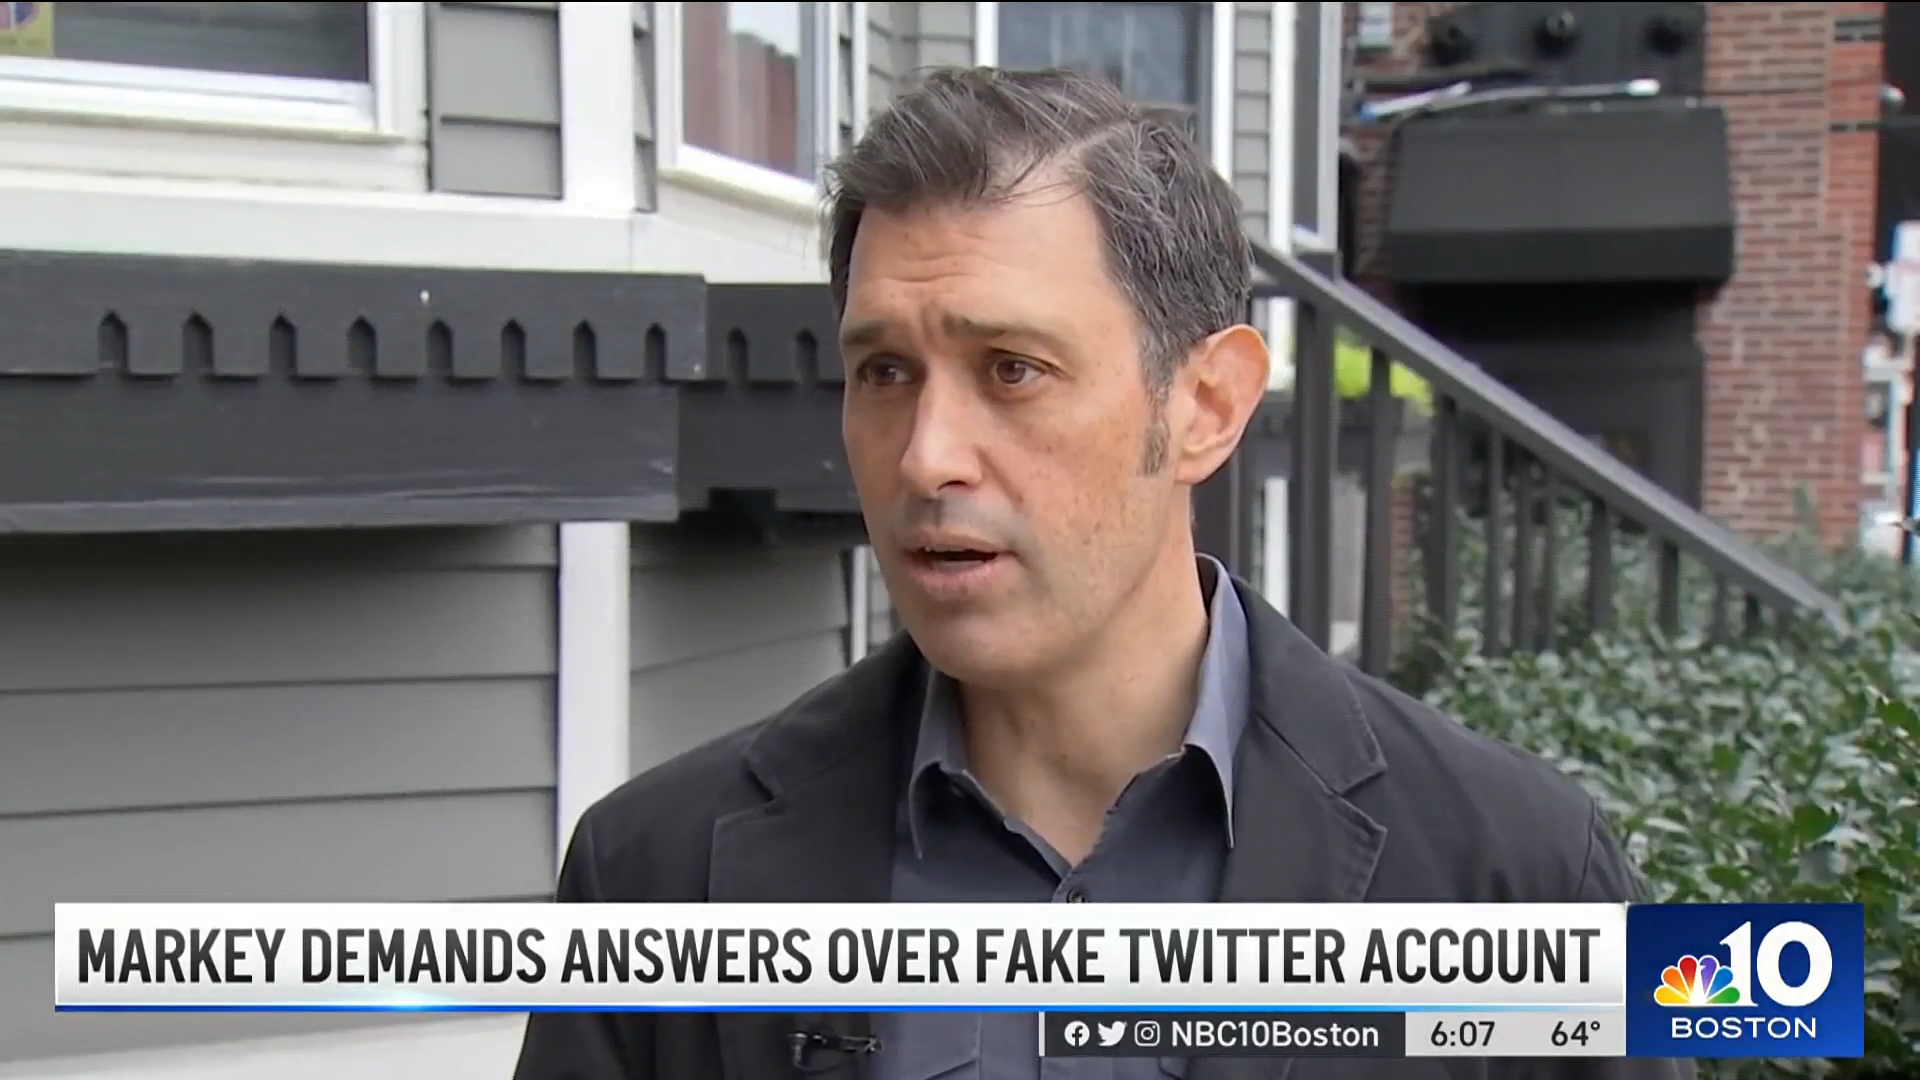 David Gerzof Richard Appears on CBS Boston and NBC Boston Discussing Recent Twitter Changes